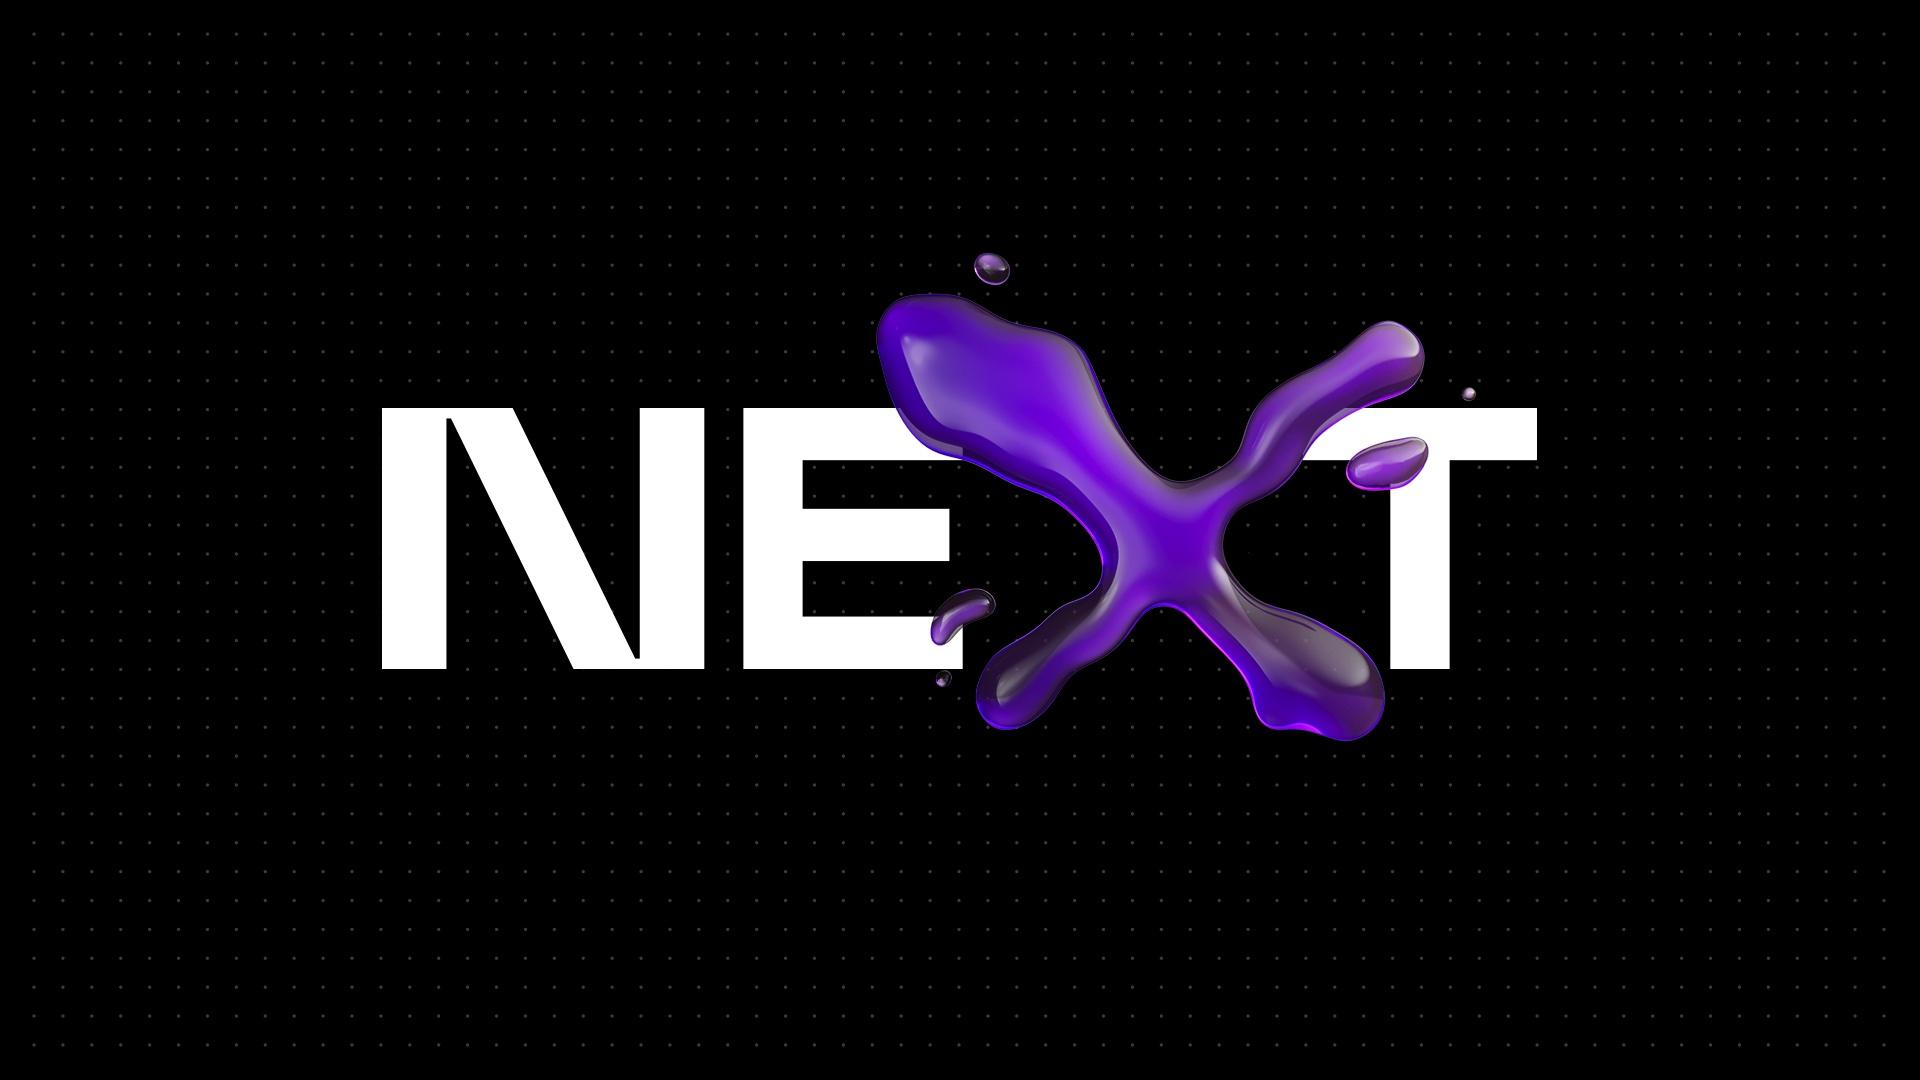 The TBWA NEXT logo with a purple 3D letter X